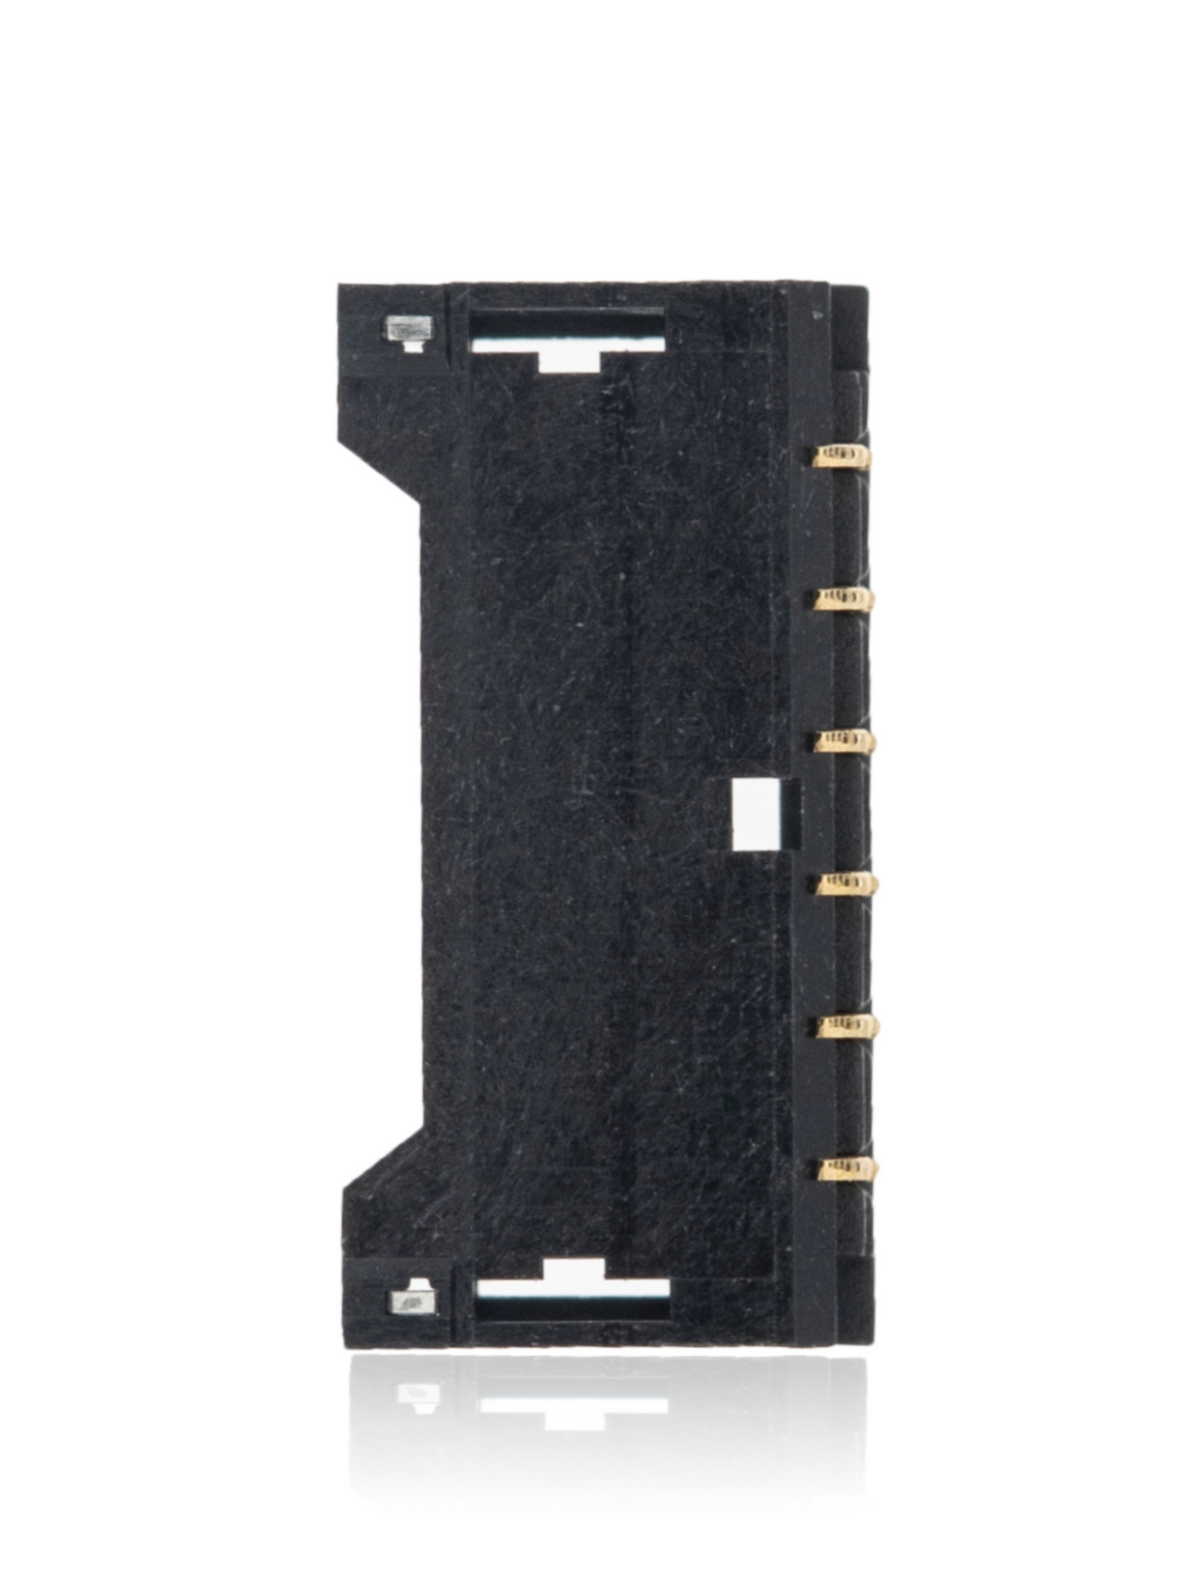 SPEAKER FPC CONNECTOR (6 PIN) FOR IPAD 3 / 4 (J3700:)